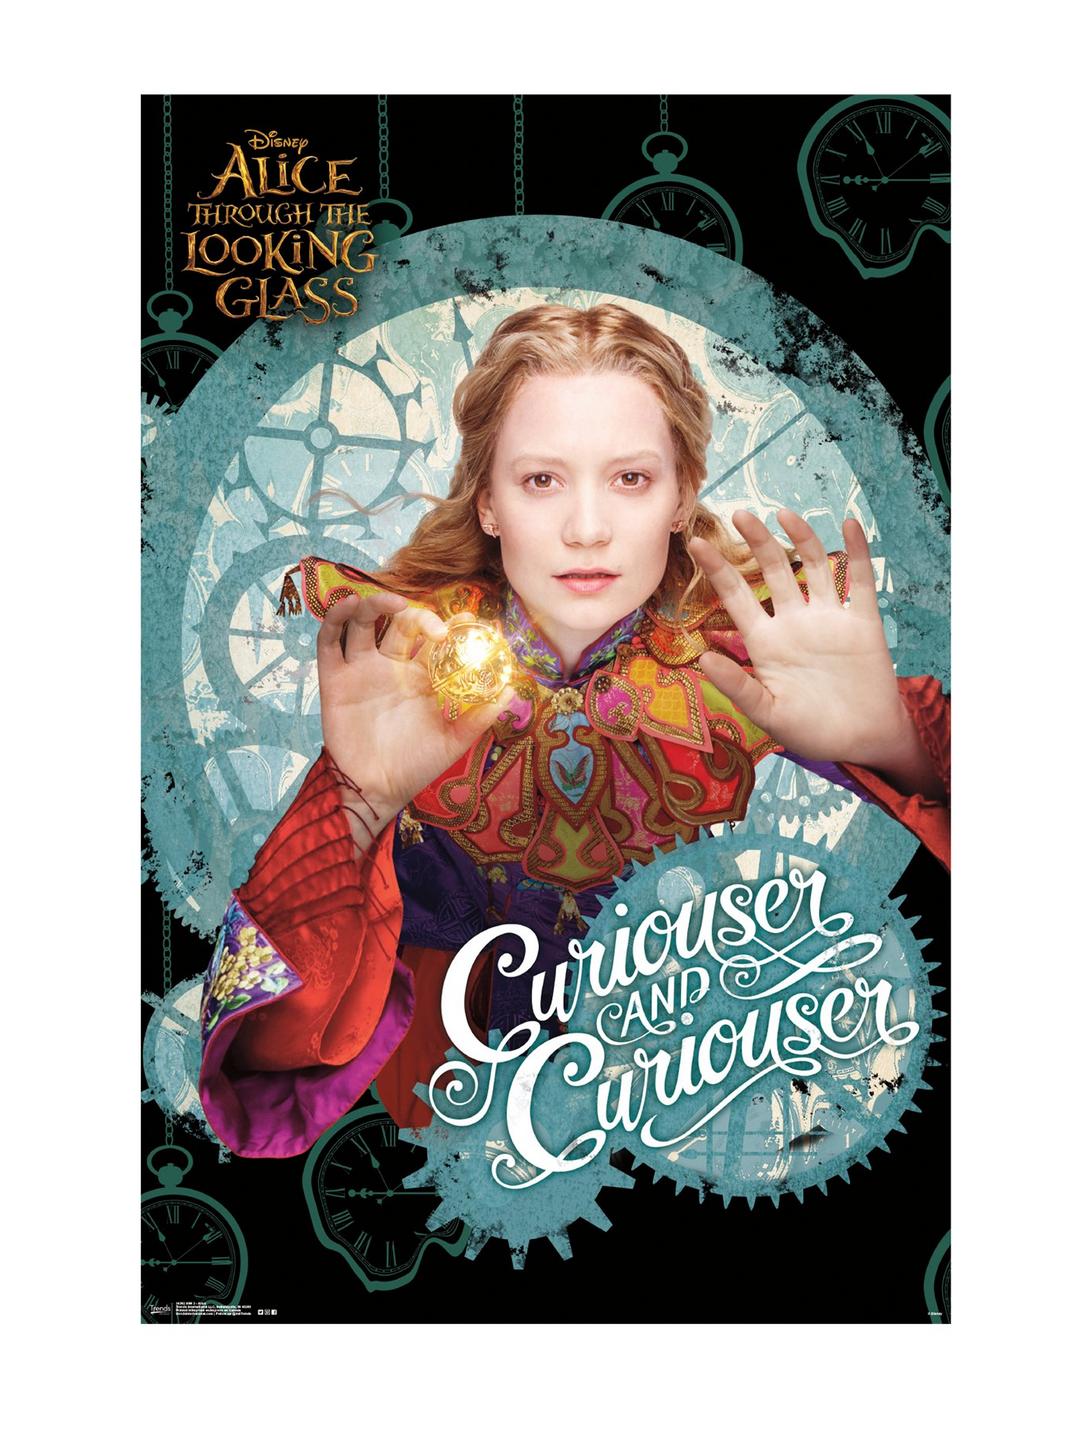 Disney Alice Through The Looking Glass Curiouser & Curiouser Poster, , hi-res